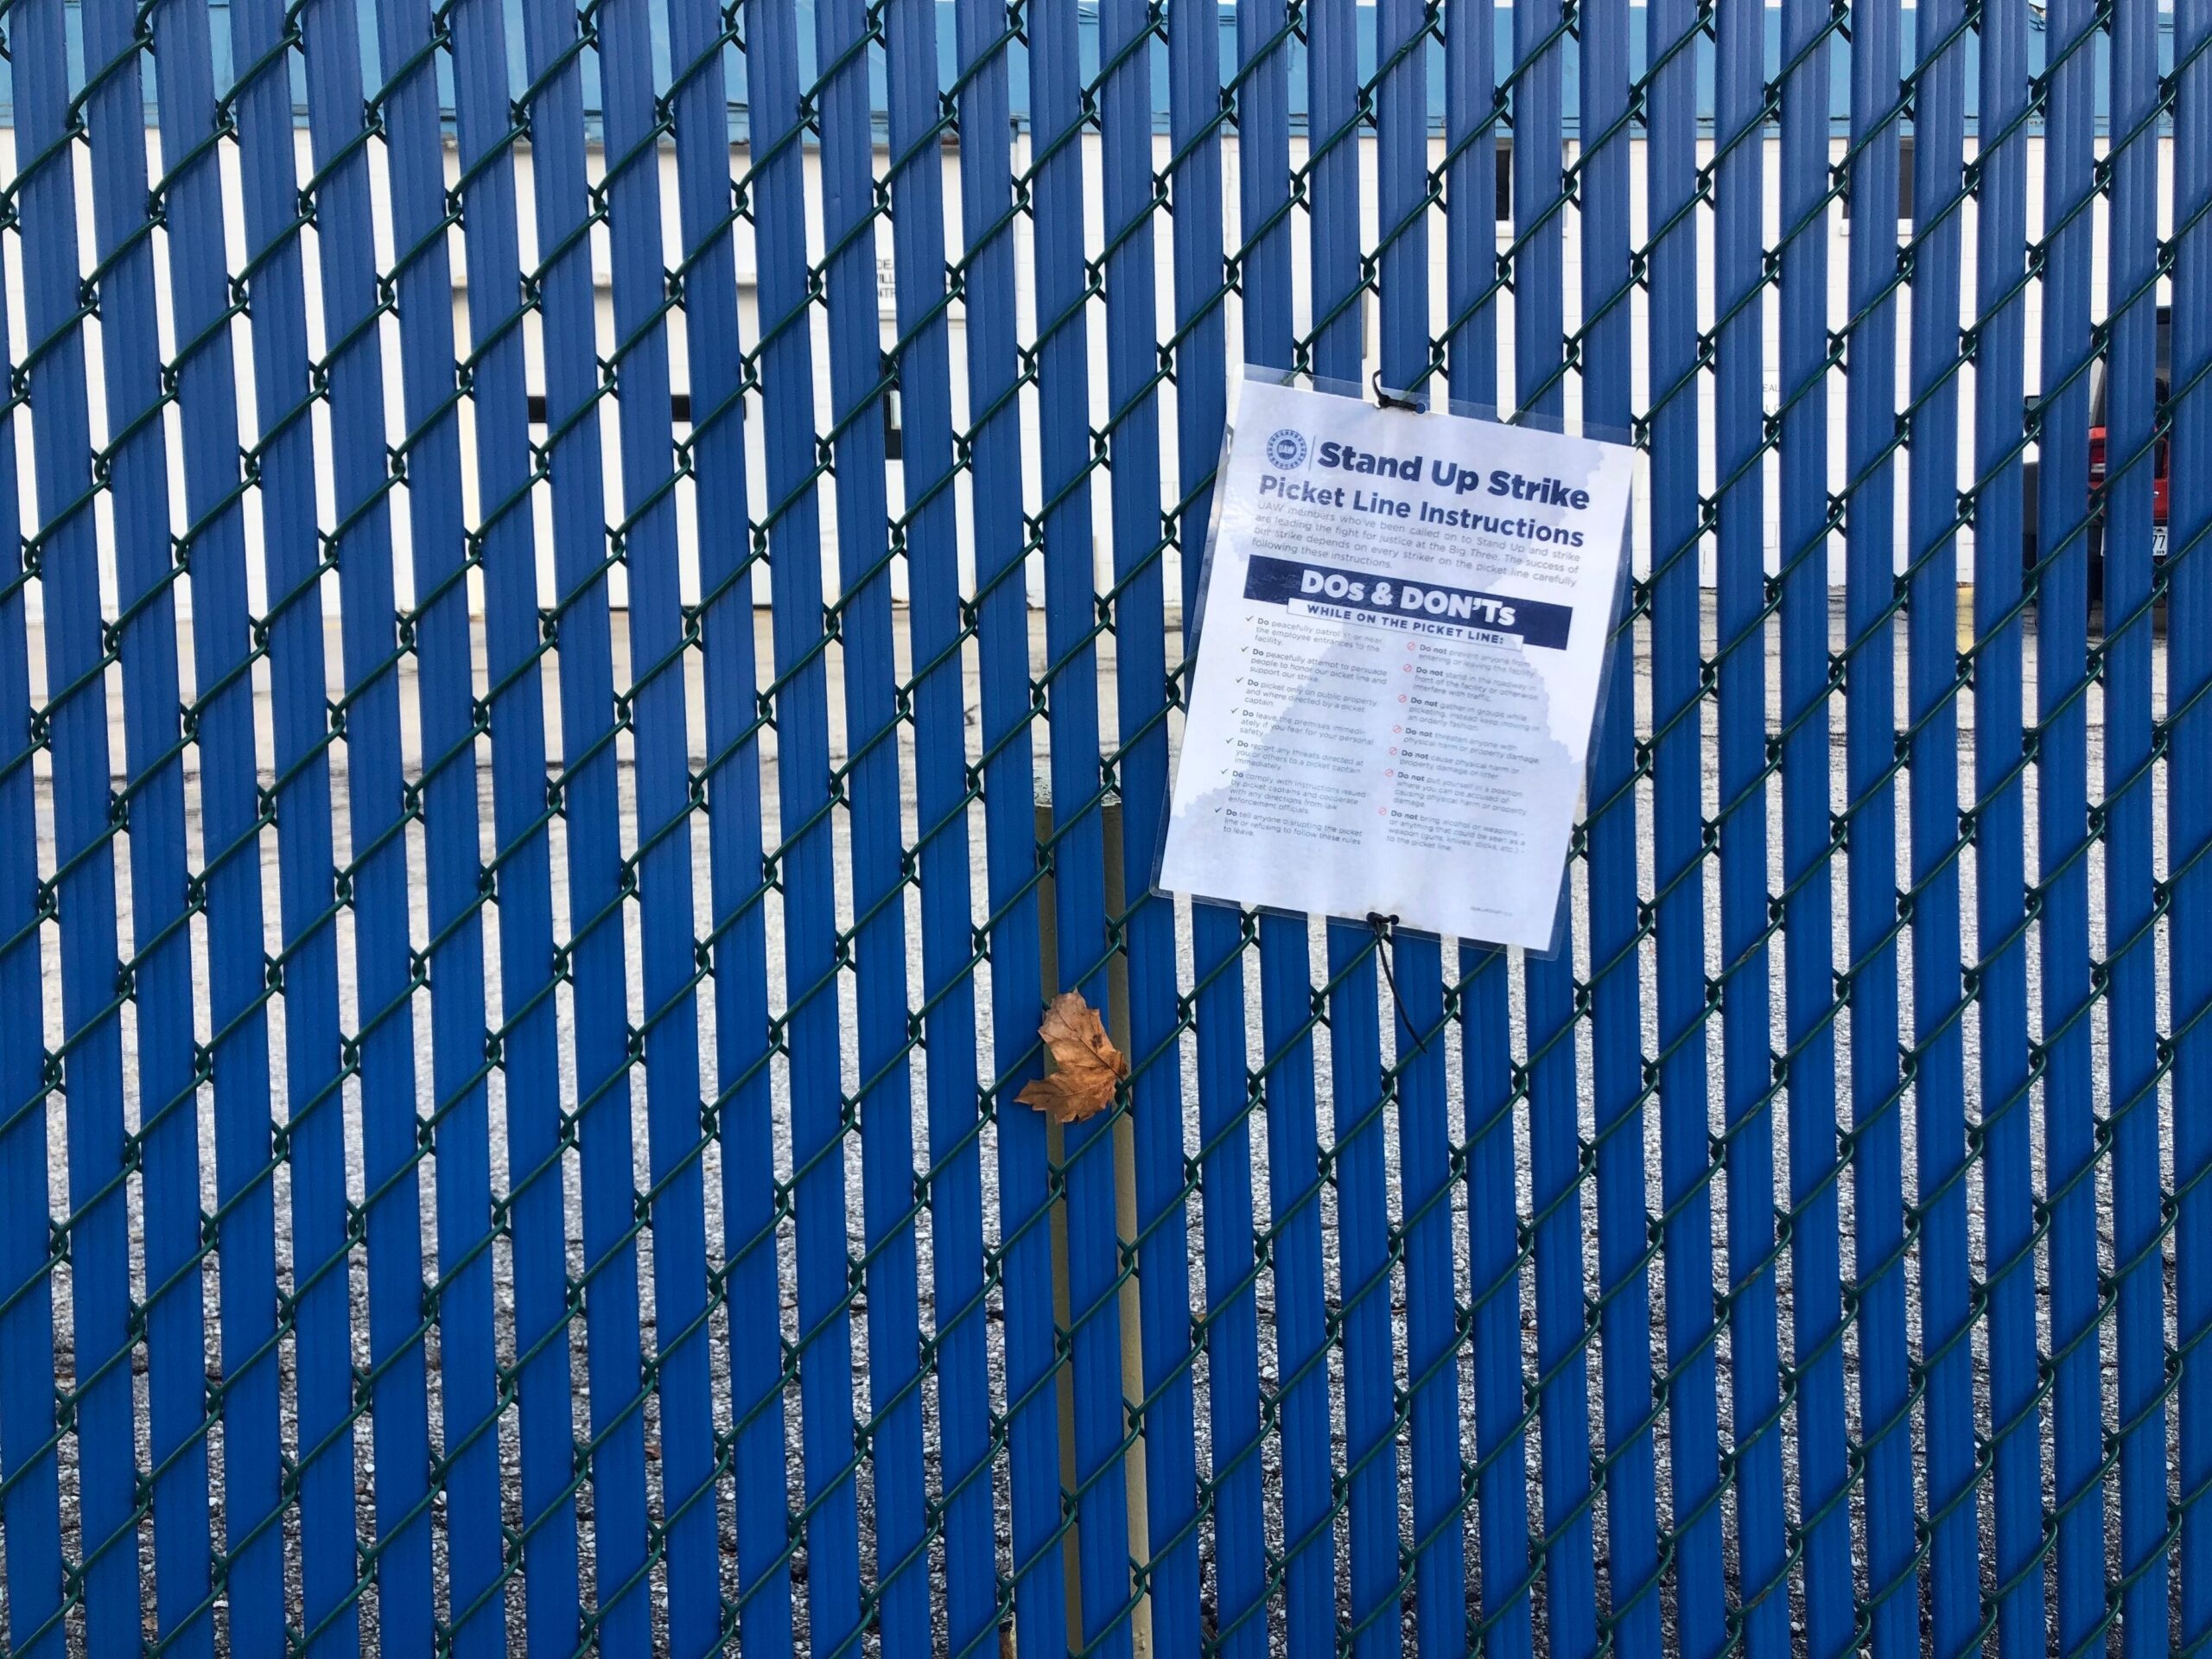 A document attached to a fence with 